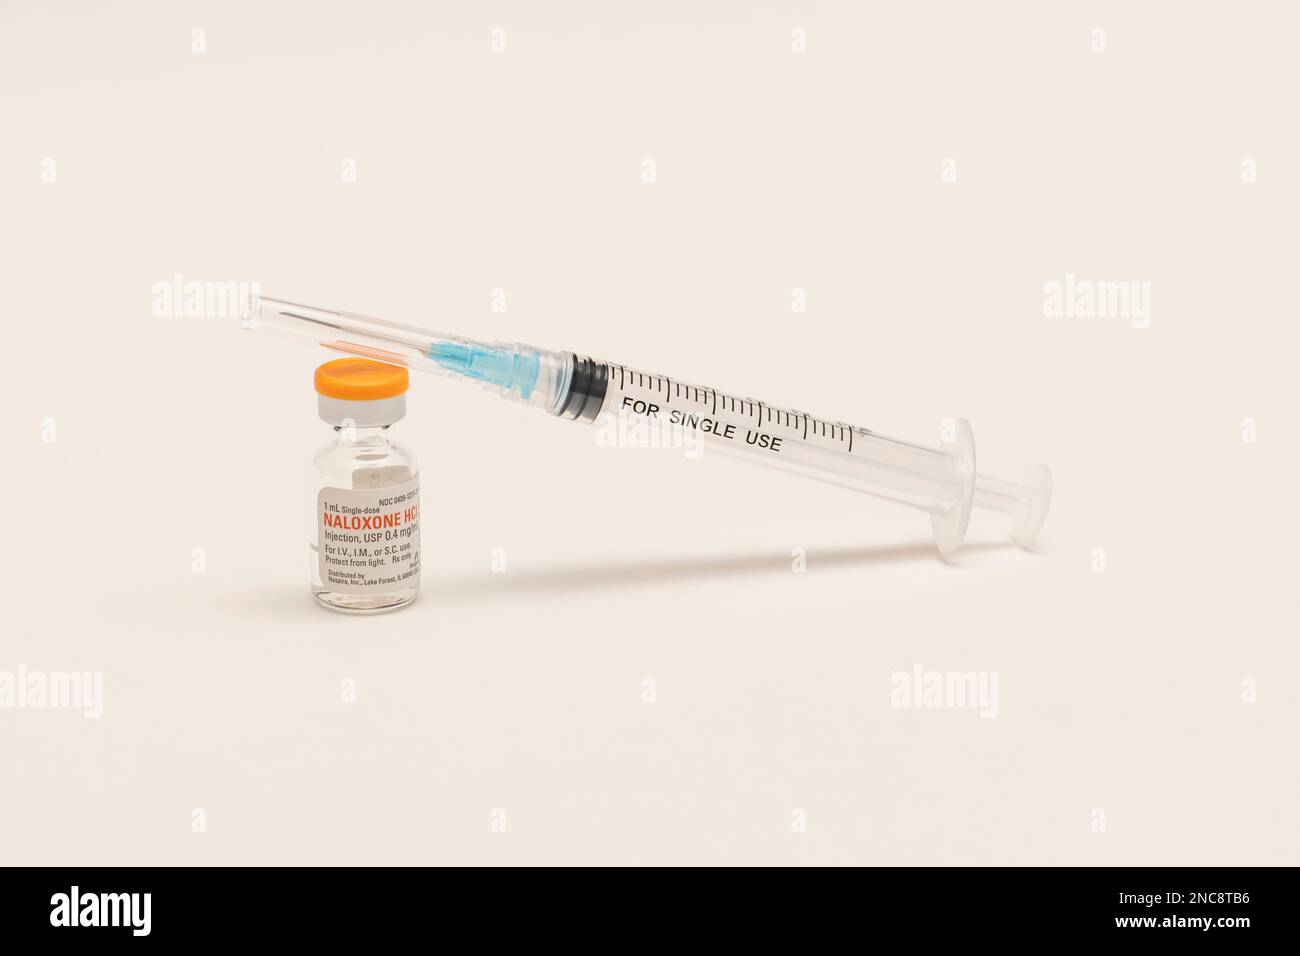 A bottle of Naloxone on white background with needle.  Naloxone is a life-saving medication that can reverse an overdose from opioids. Stock Photo